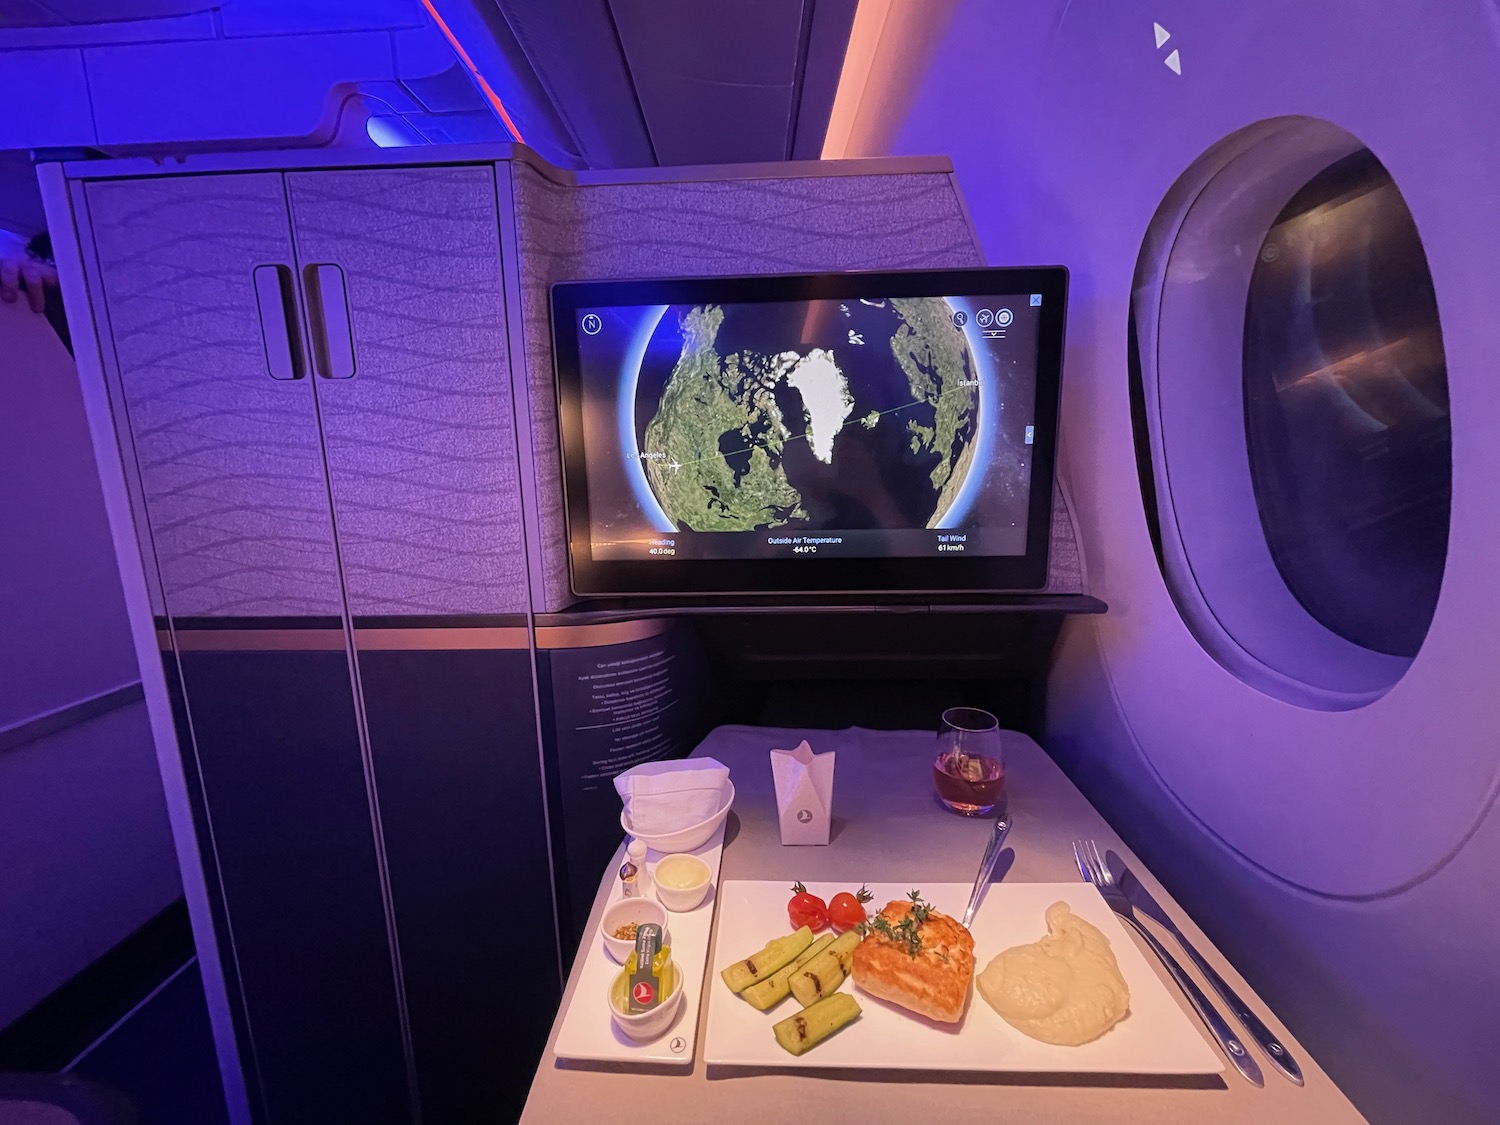 a tv on a table in a plane